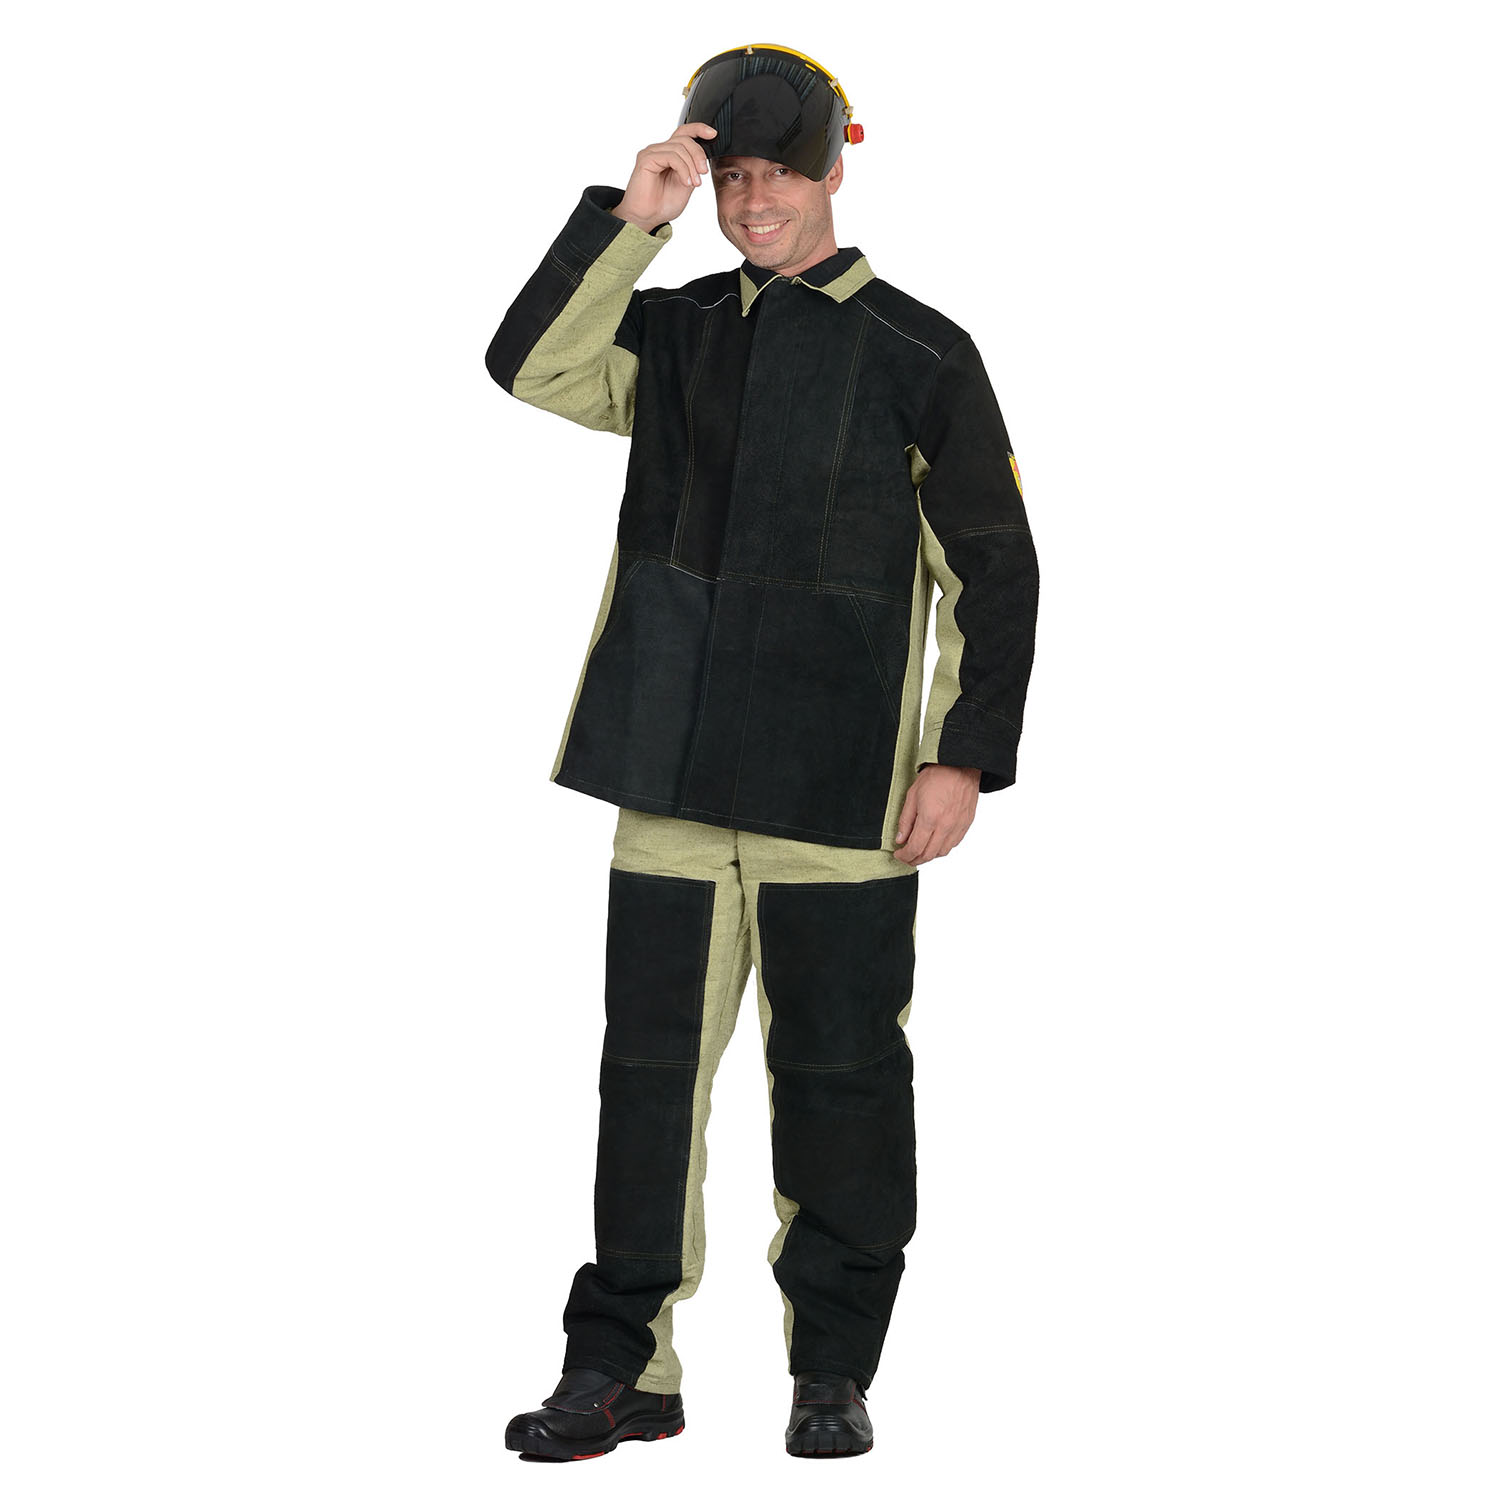 Welding Protective Clothing